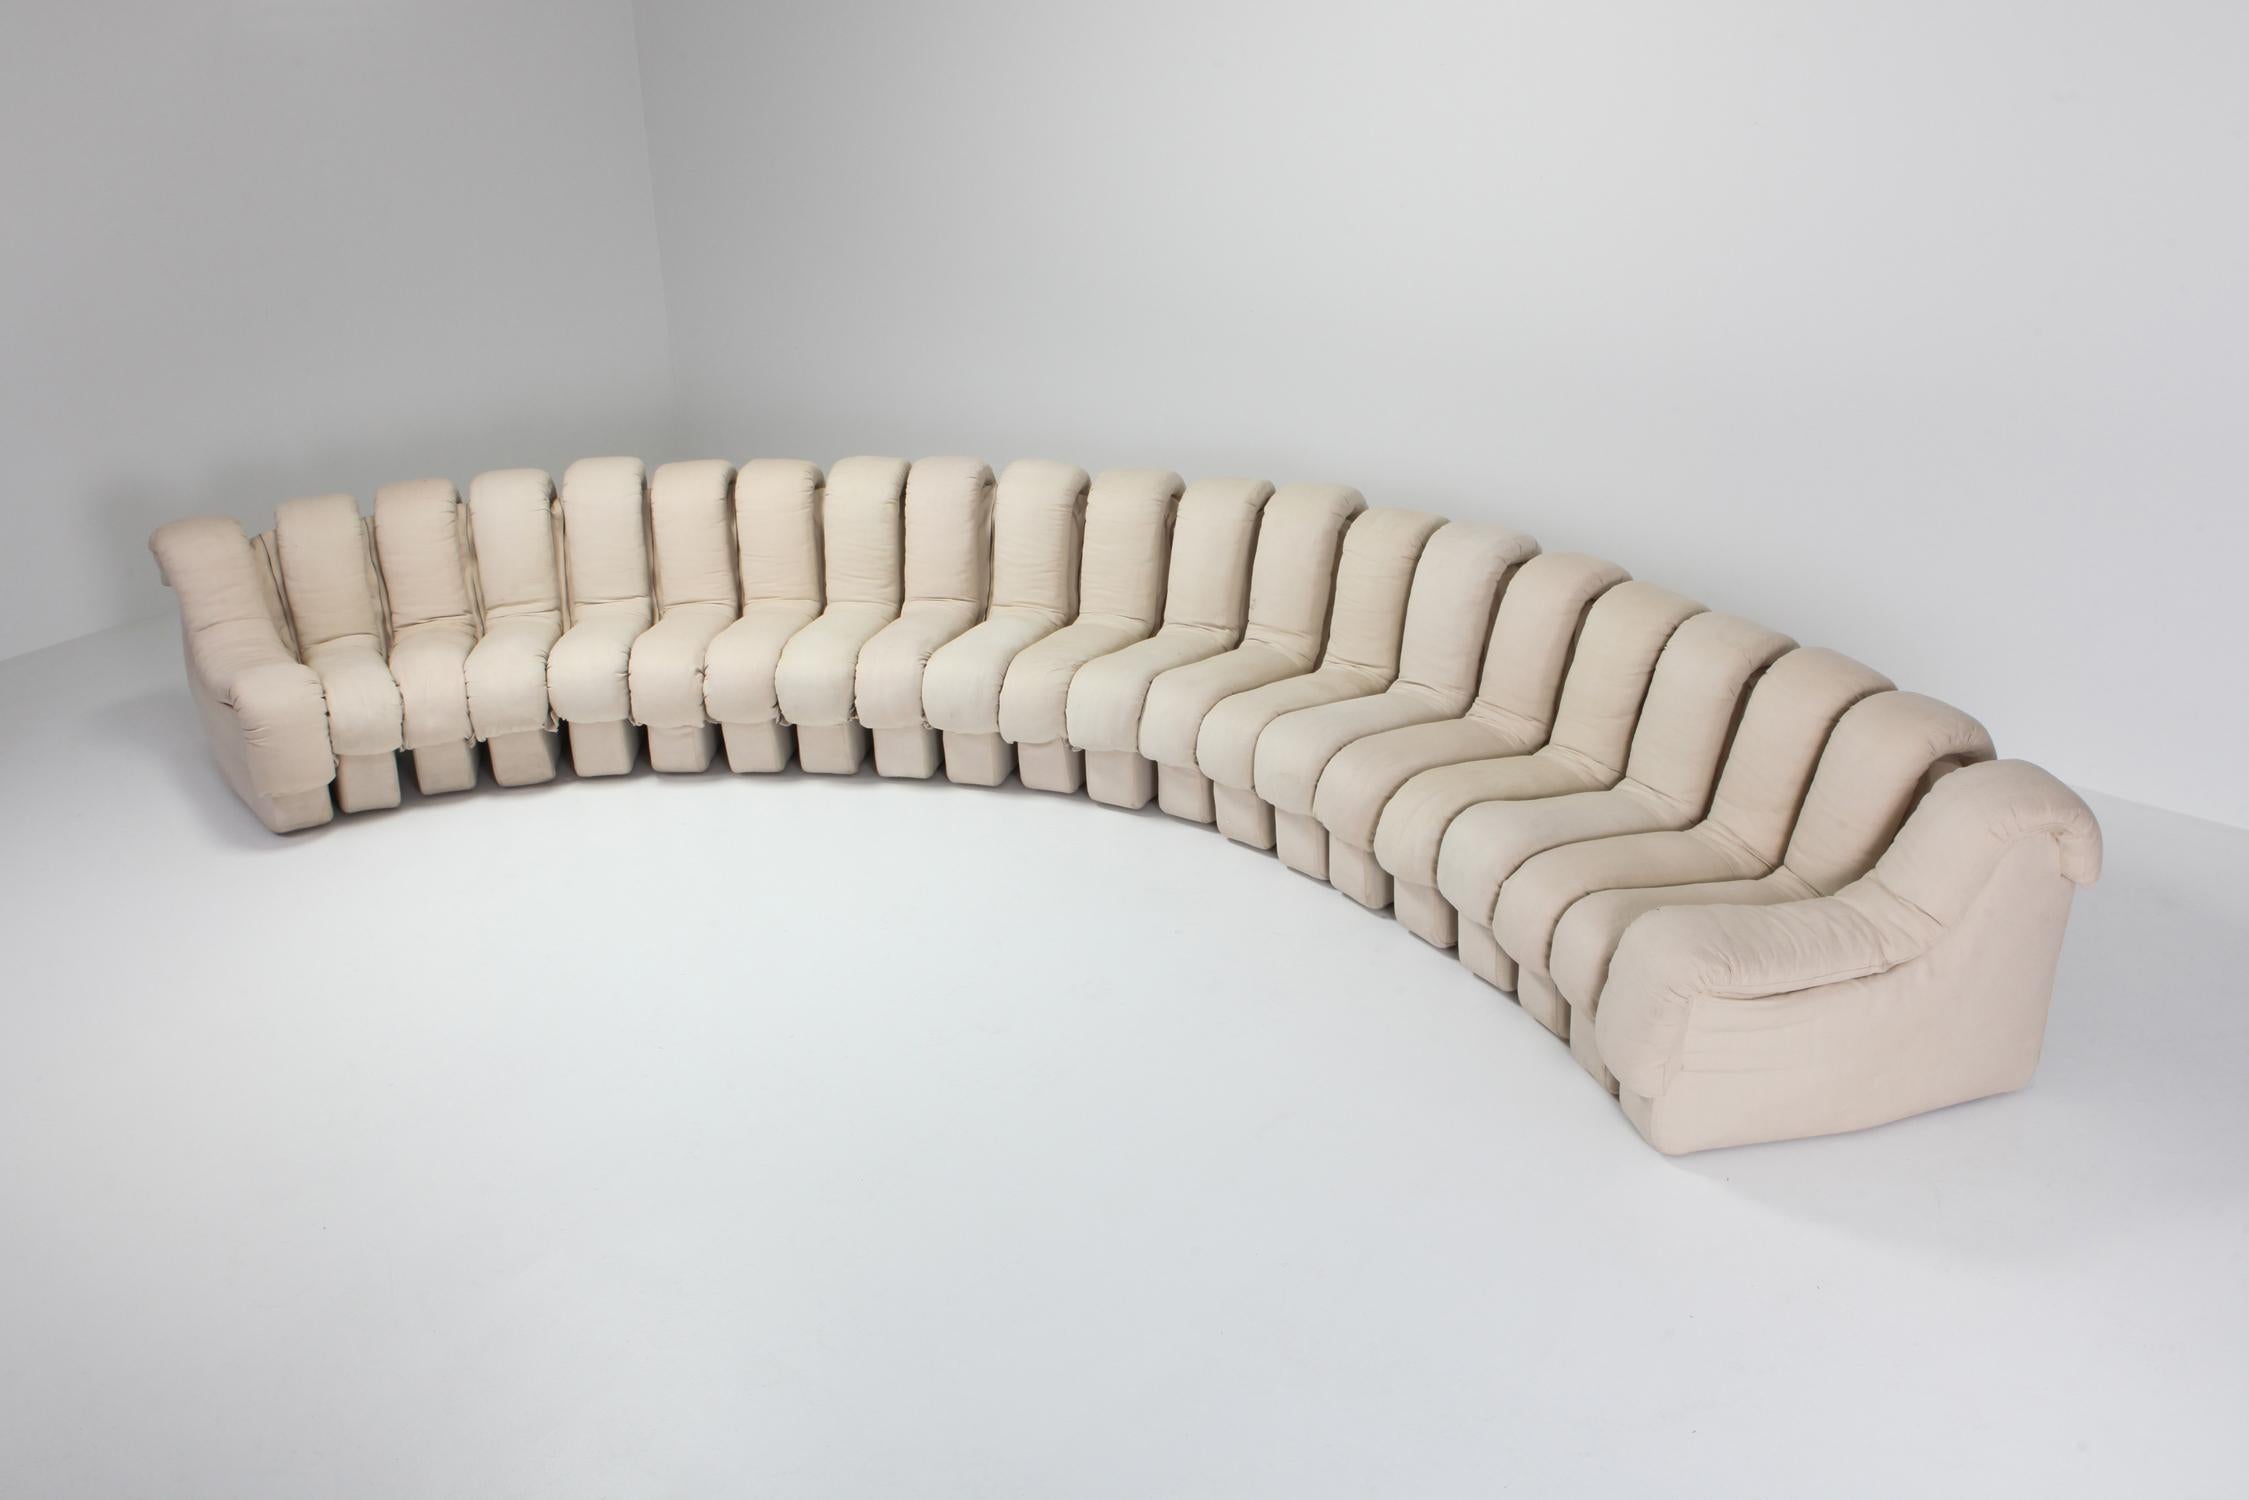 De Sede ‘Snake’ DS-600, in grey colored leather, Switzerland, 1972. 

De Sede 'Non Stop' sectional sofa containing twenty-one pieces in ivory linnen, of which 19 centre pieces and two higher armrests. Any number of pieces can be zipped together